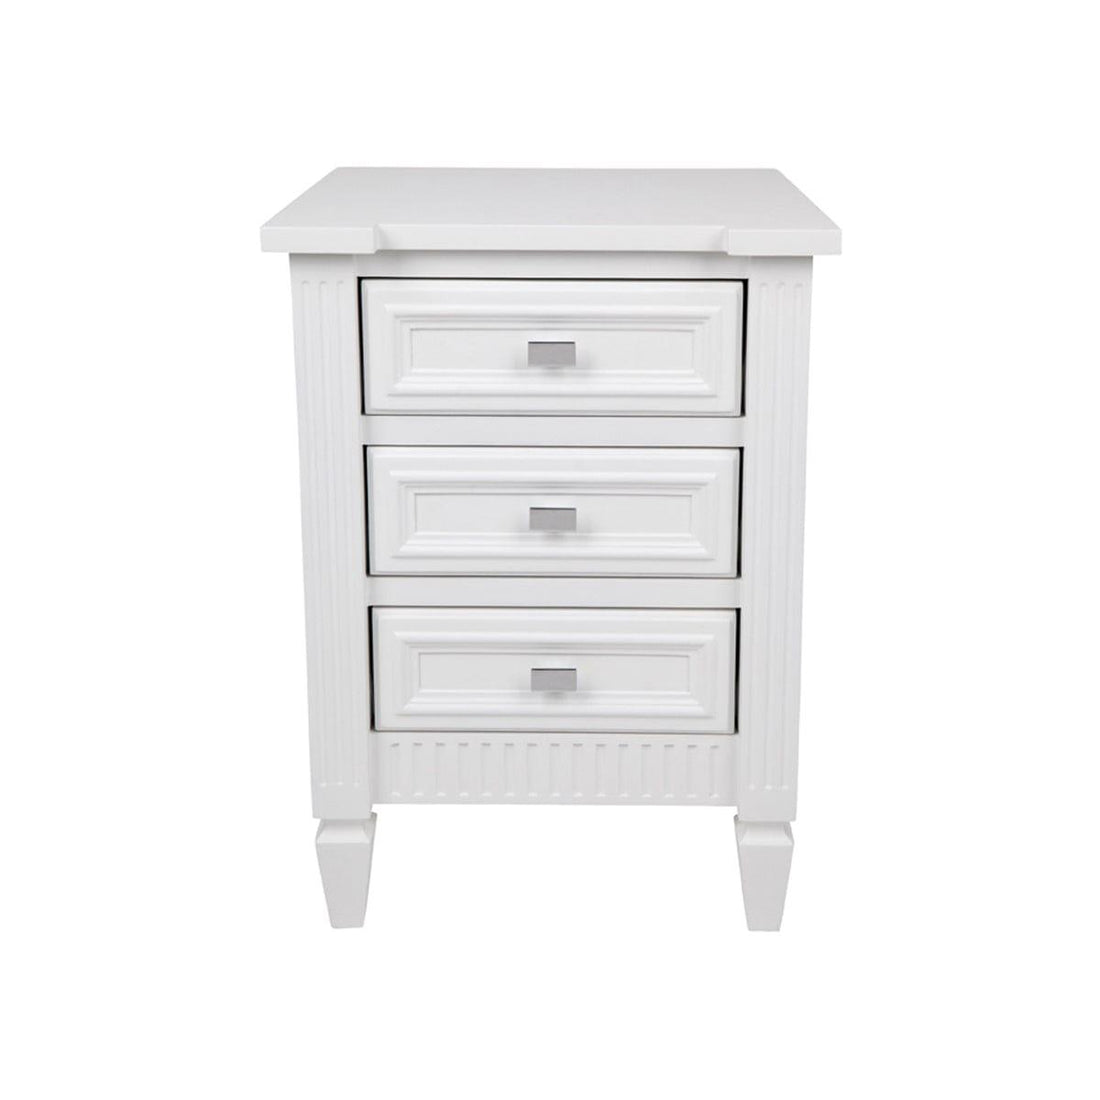 House Journey Merci Bedside Table - Small White